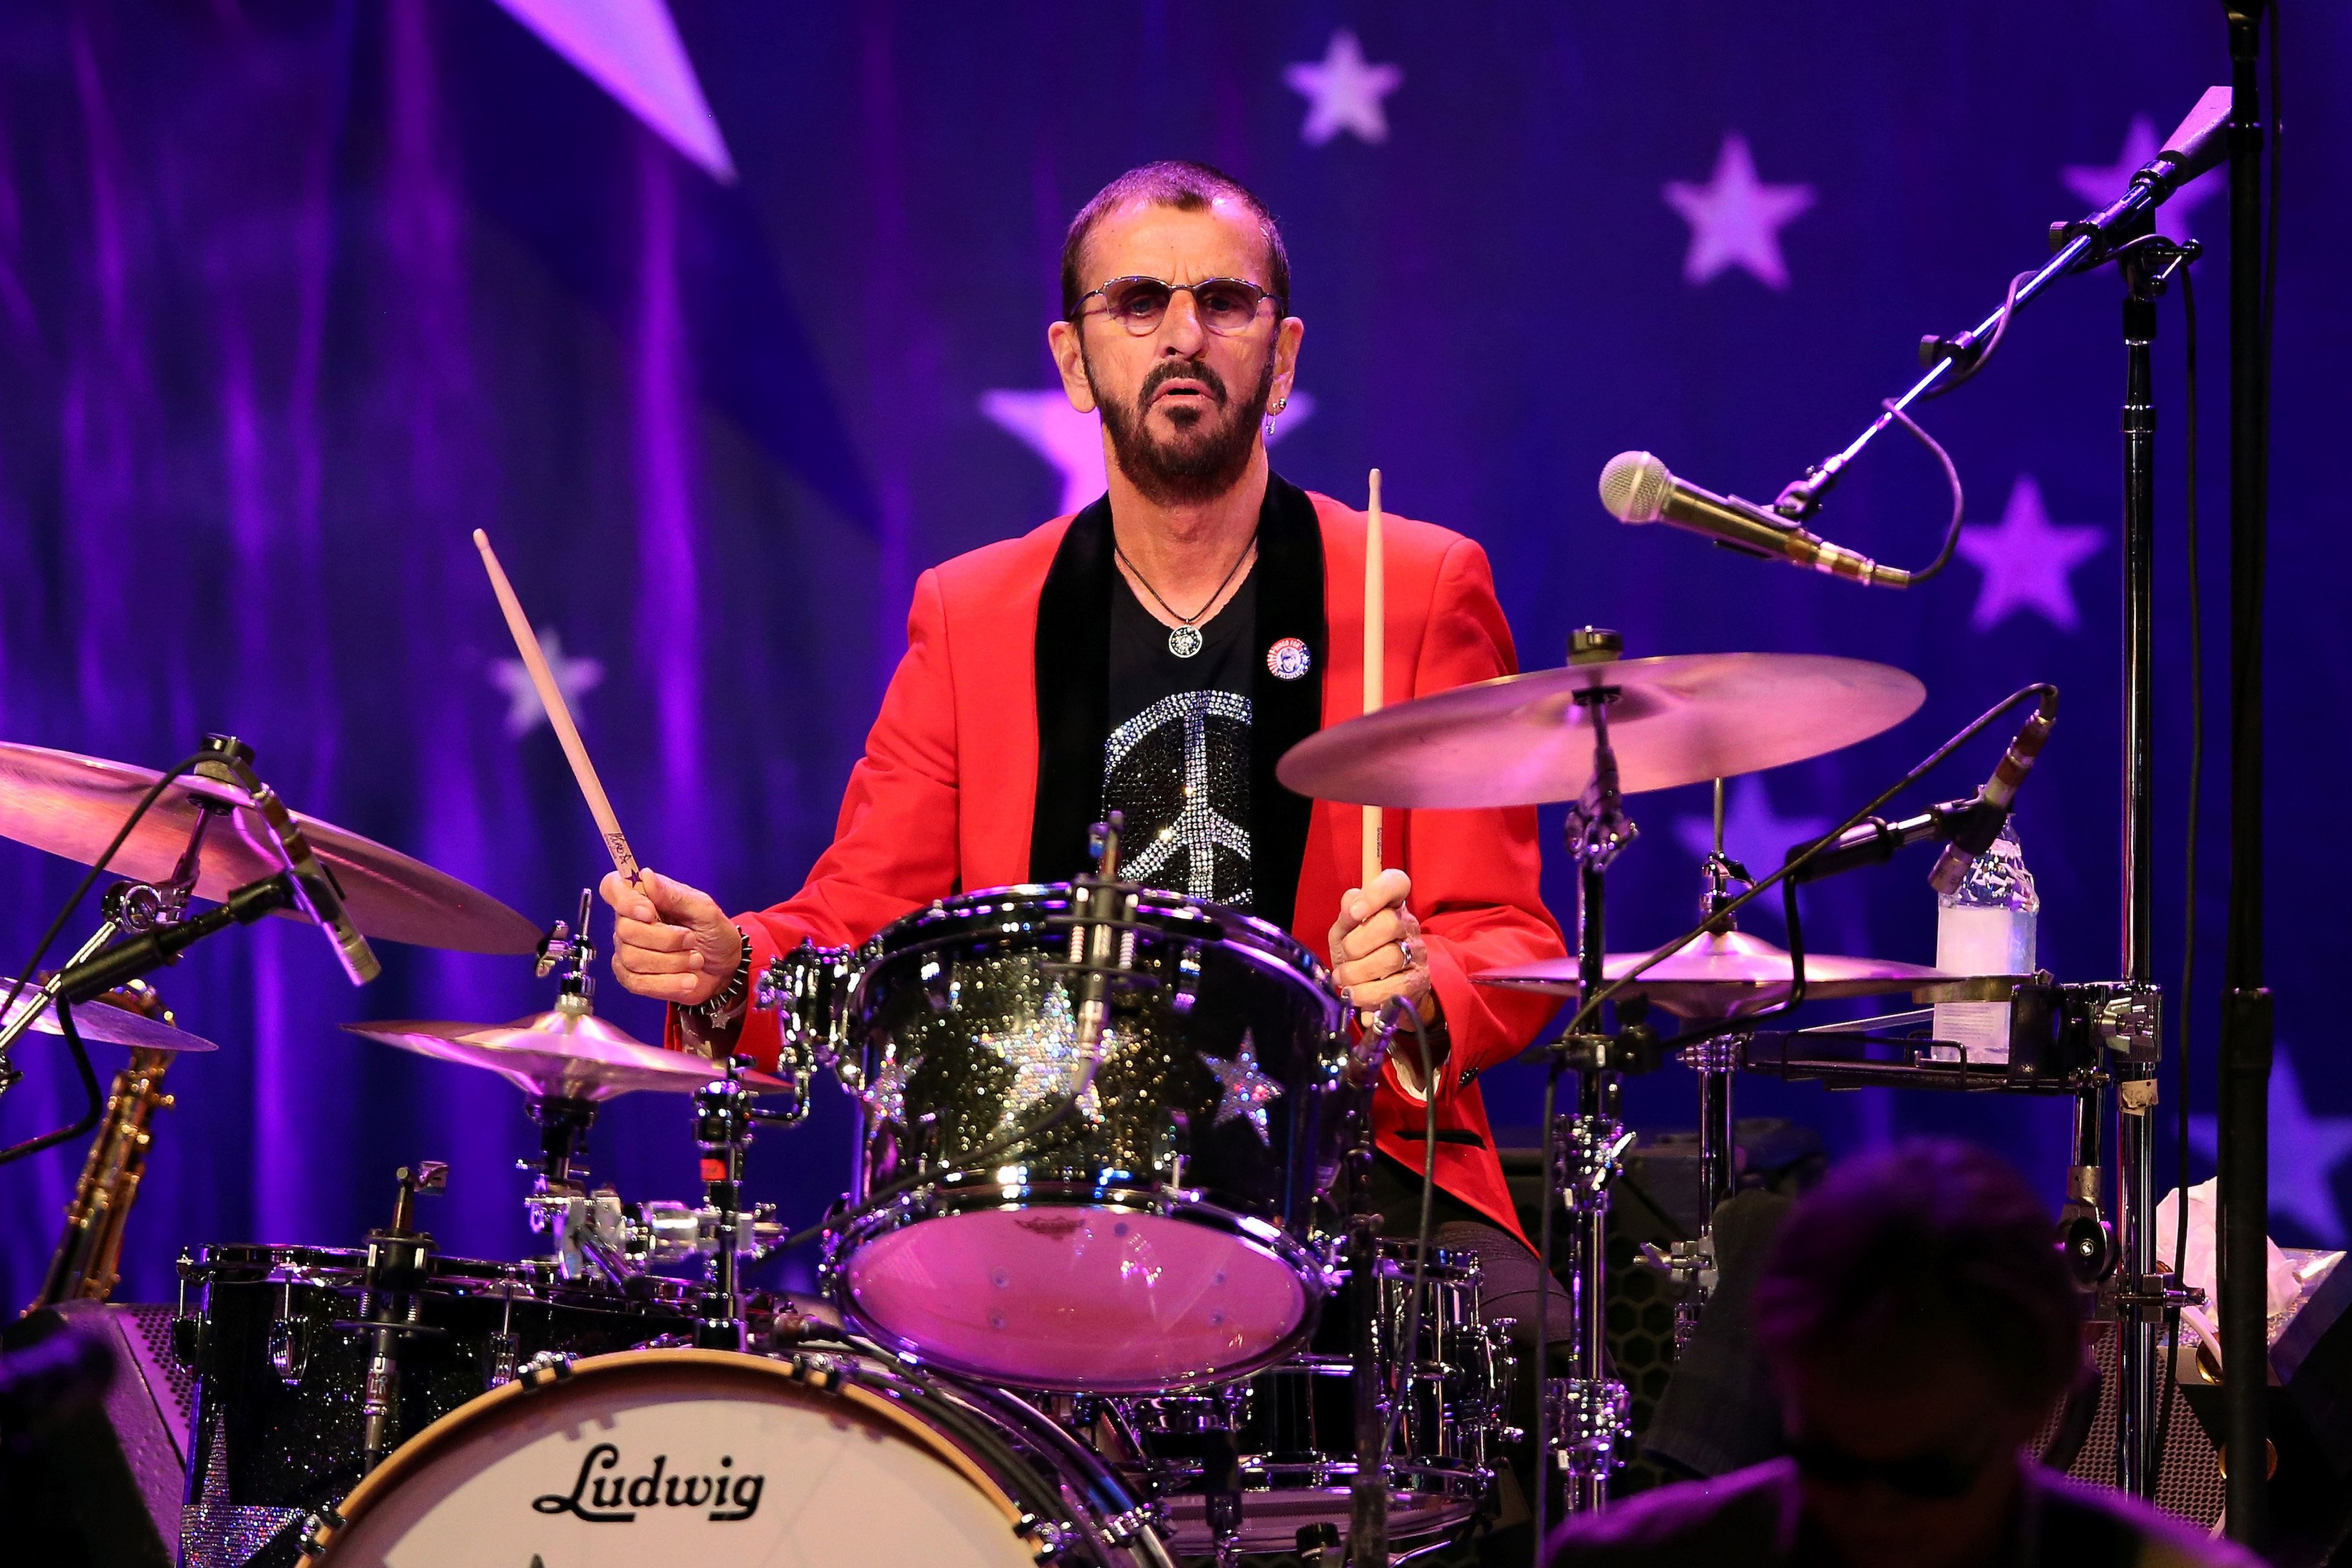 Ringo Starr of Ringo Starr & His All Starr Band performs at Thousand Oaks Civic Arts Plaza